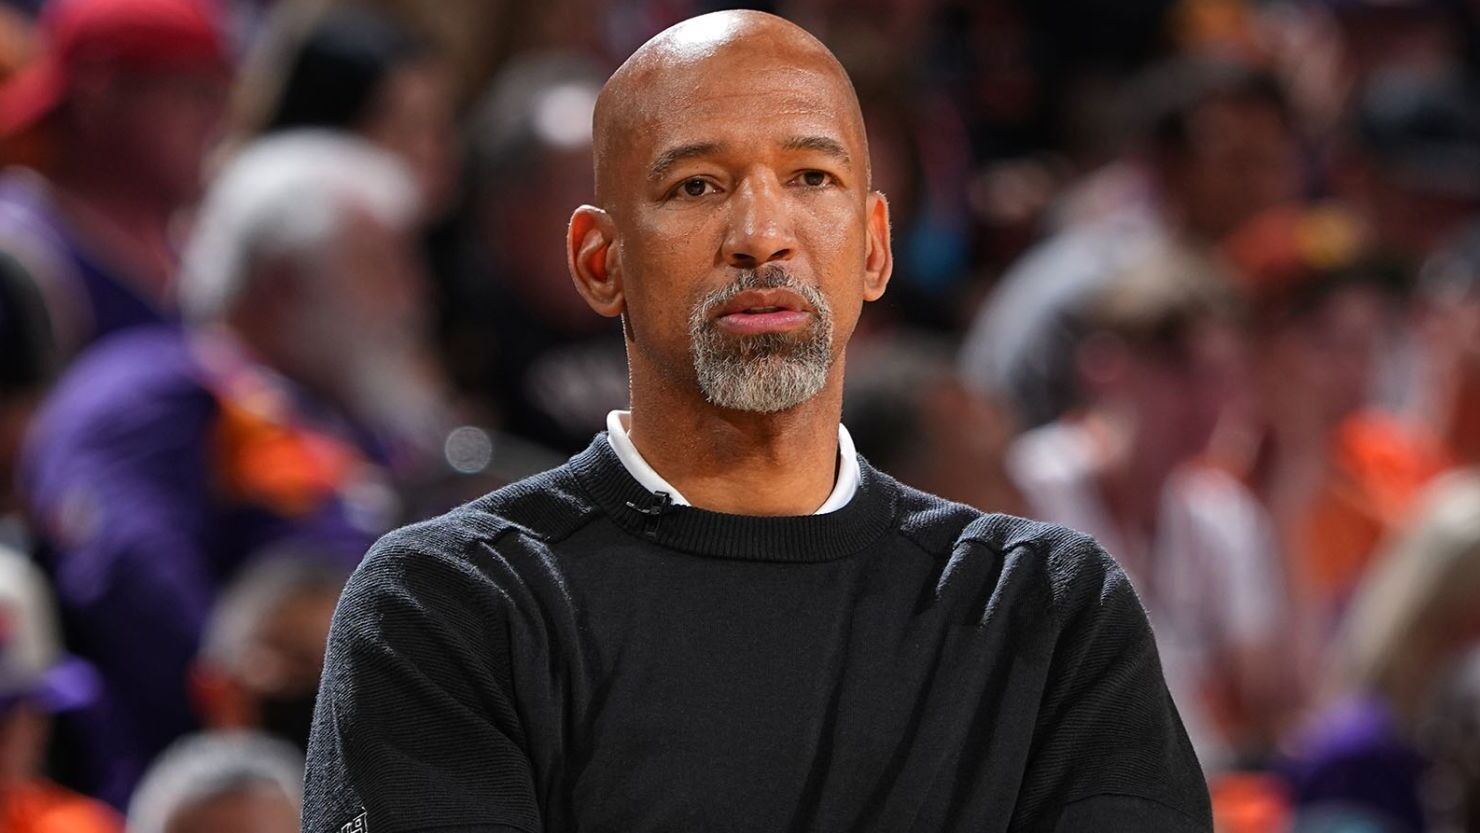 Pistons Coach Monty Williams Criticizes Referees After Controversial No-Call In Loss To Knicks